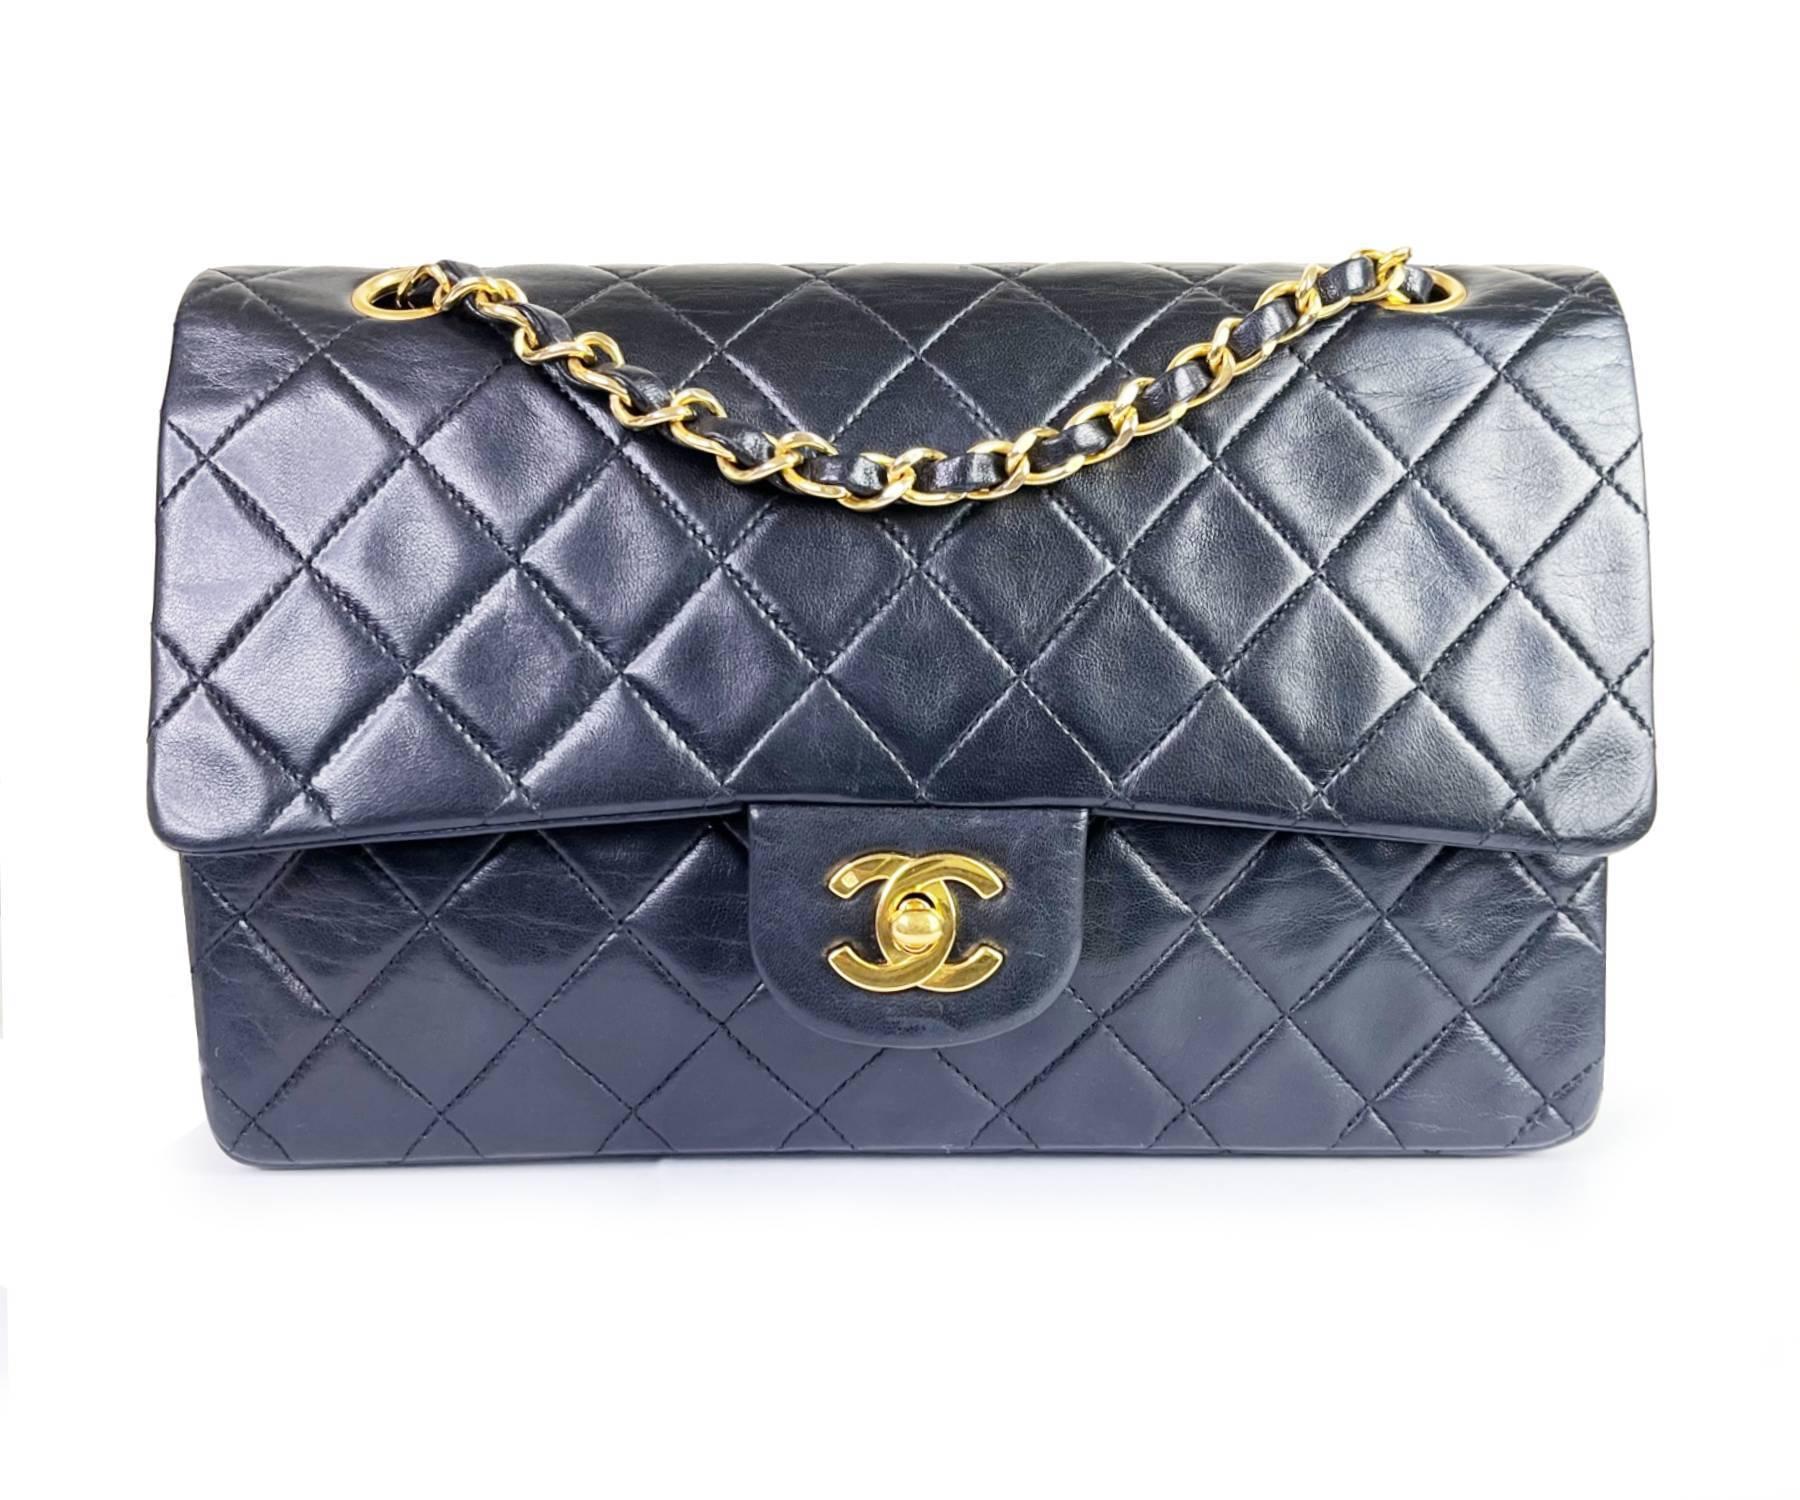 Chanel Vintage Classic Timeless Double Flap Lambskin 10″ Shoulder Bag

*192xxxx
* Made in France
*Comes with the control number card and dustbag
*24k Gold Plated Hardware

-It is approximately 10″ x 5.5″ x 2.5″.
-Strap is approximately 16.5″ Single